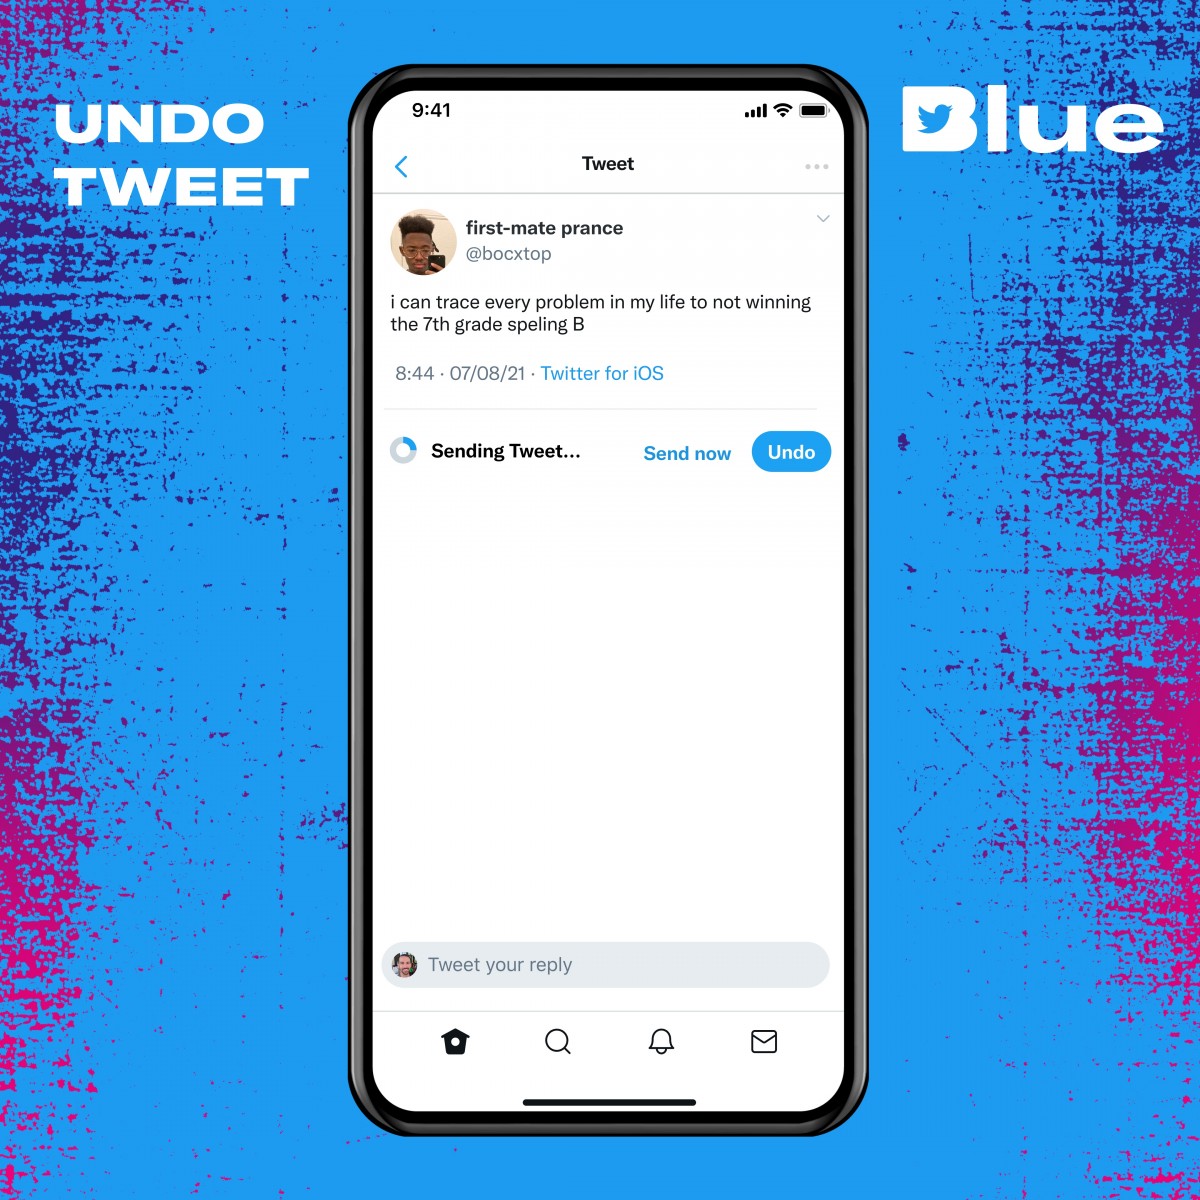 Twitter Blue brings undo tweet, custom navigation, bookmarks folders, and more for a monthly fee